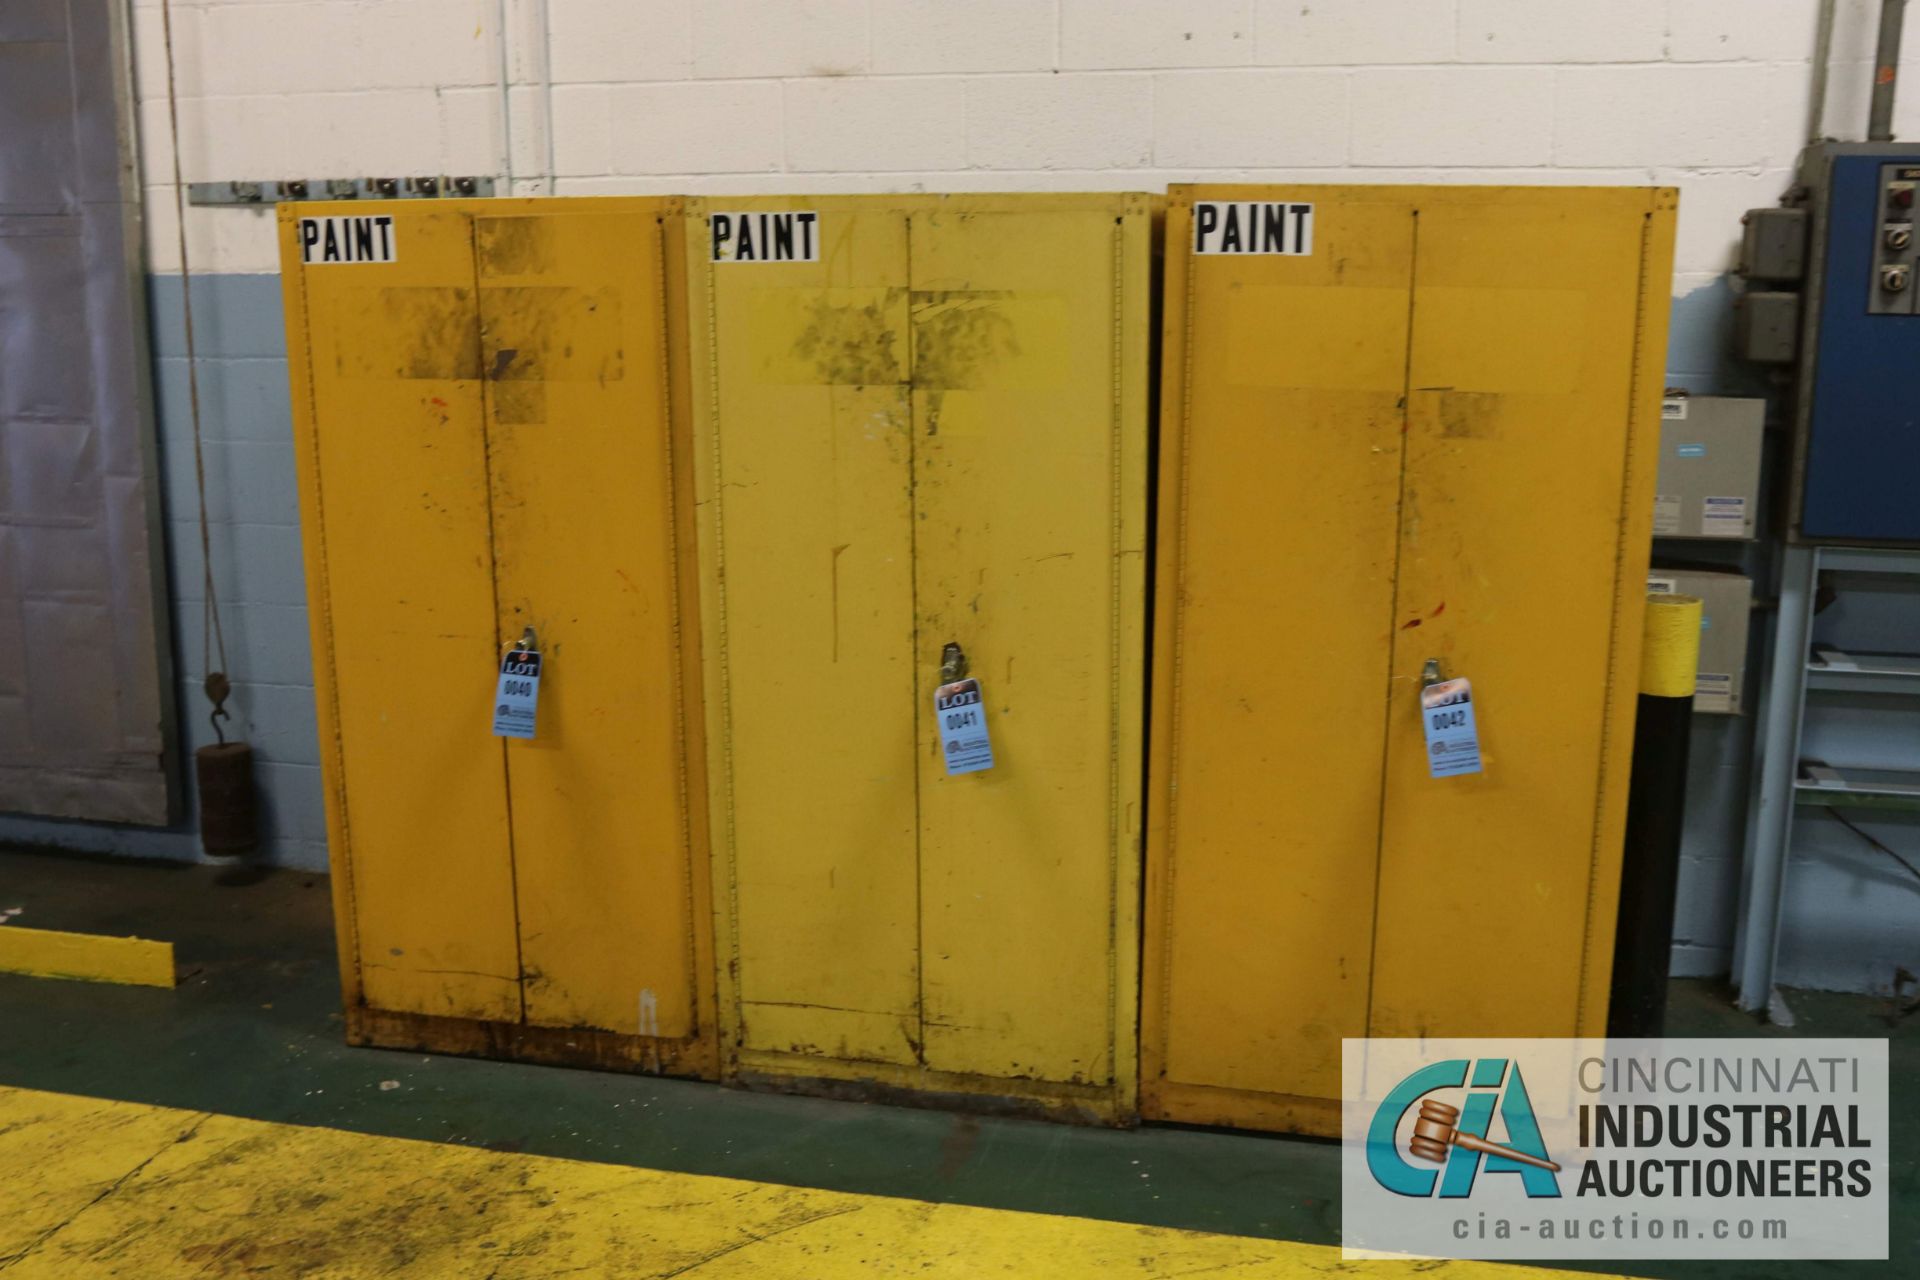 31.5" X 31.5" X 65" X 60 GALLON EAGLE FLAMMABLE CABINT - $10.00 Rigging Fee Due to Onsite Rigger -